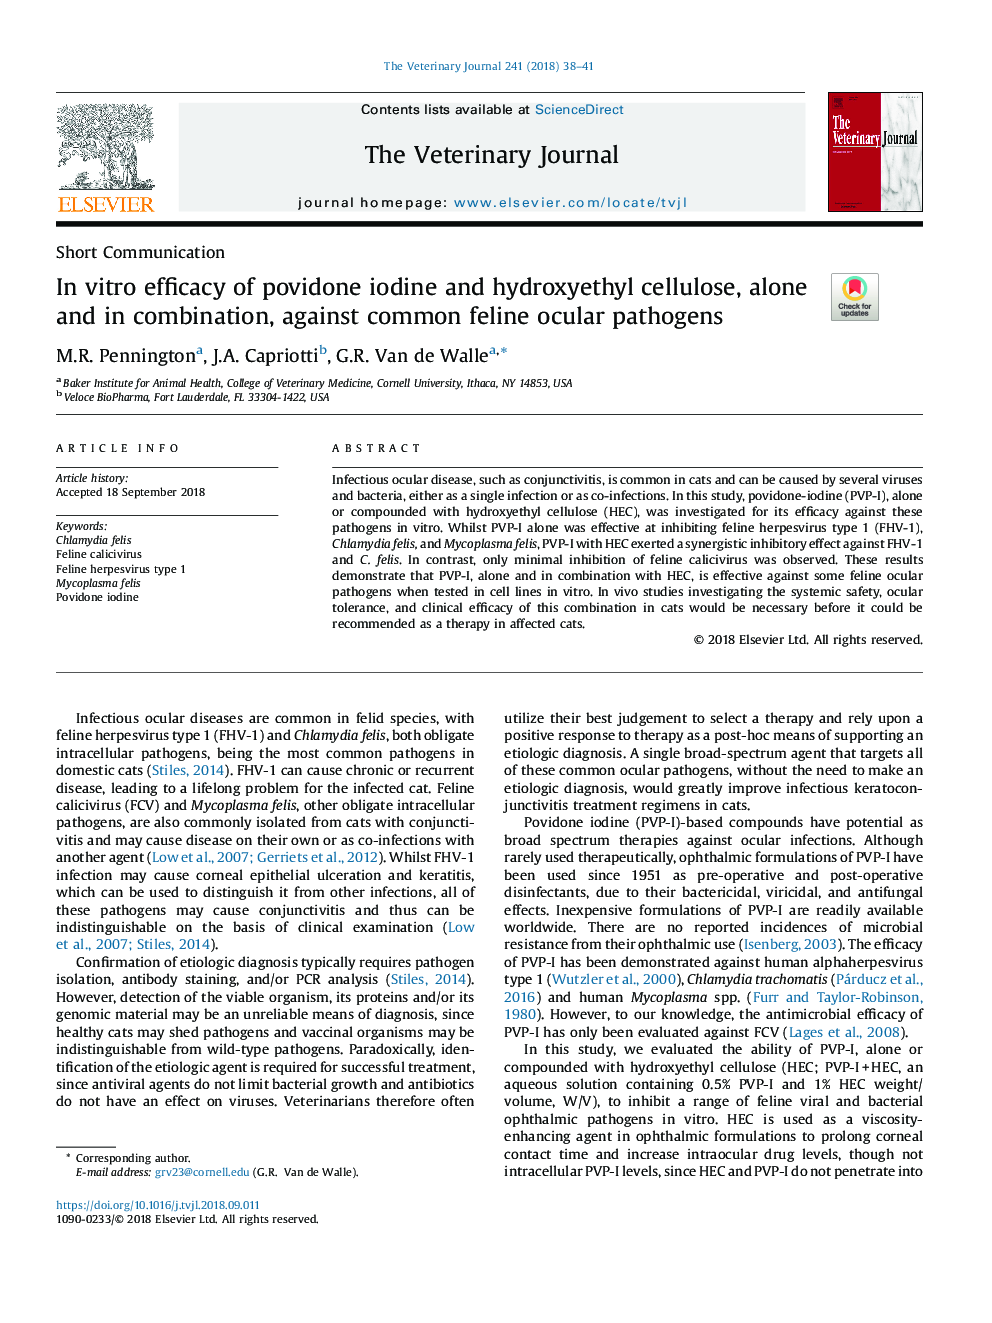 In vitro efficacy of povidone iodine and hydroxyethyl cellulose, alone and in combination, against common feline ocular pathogens